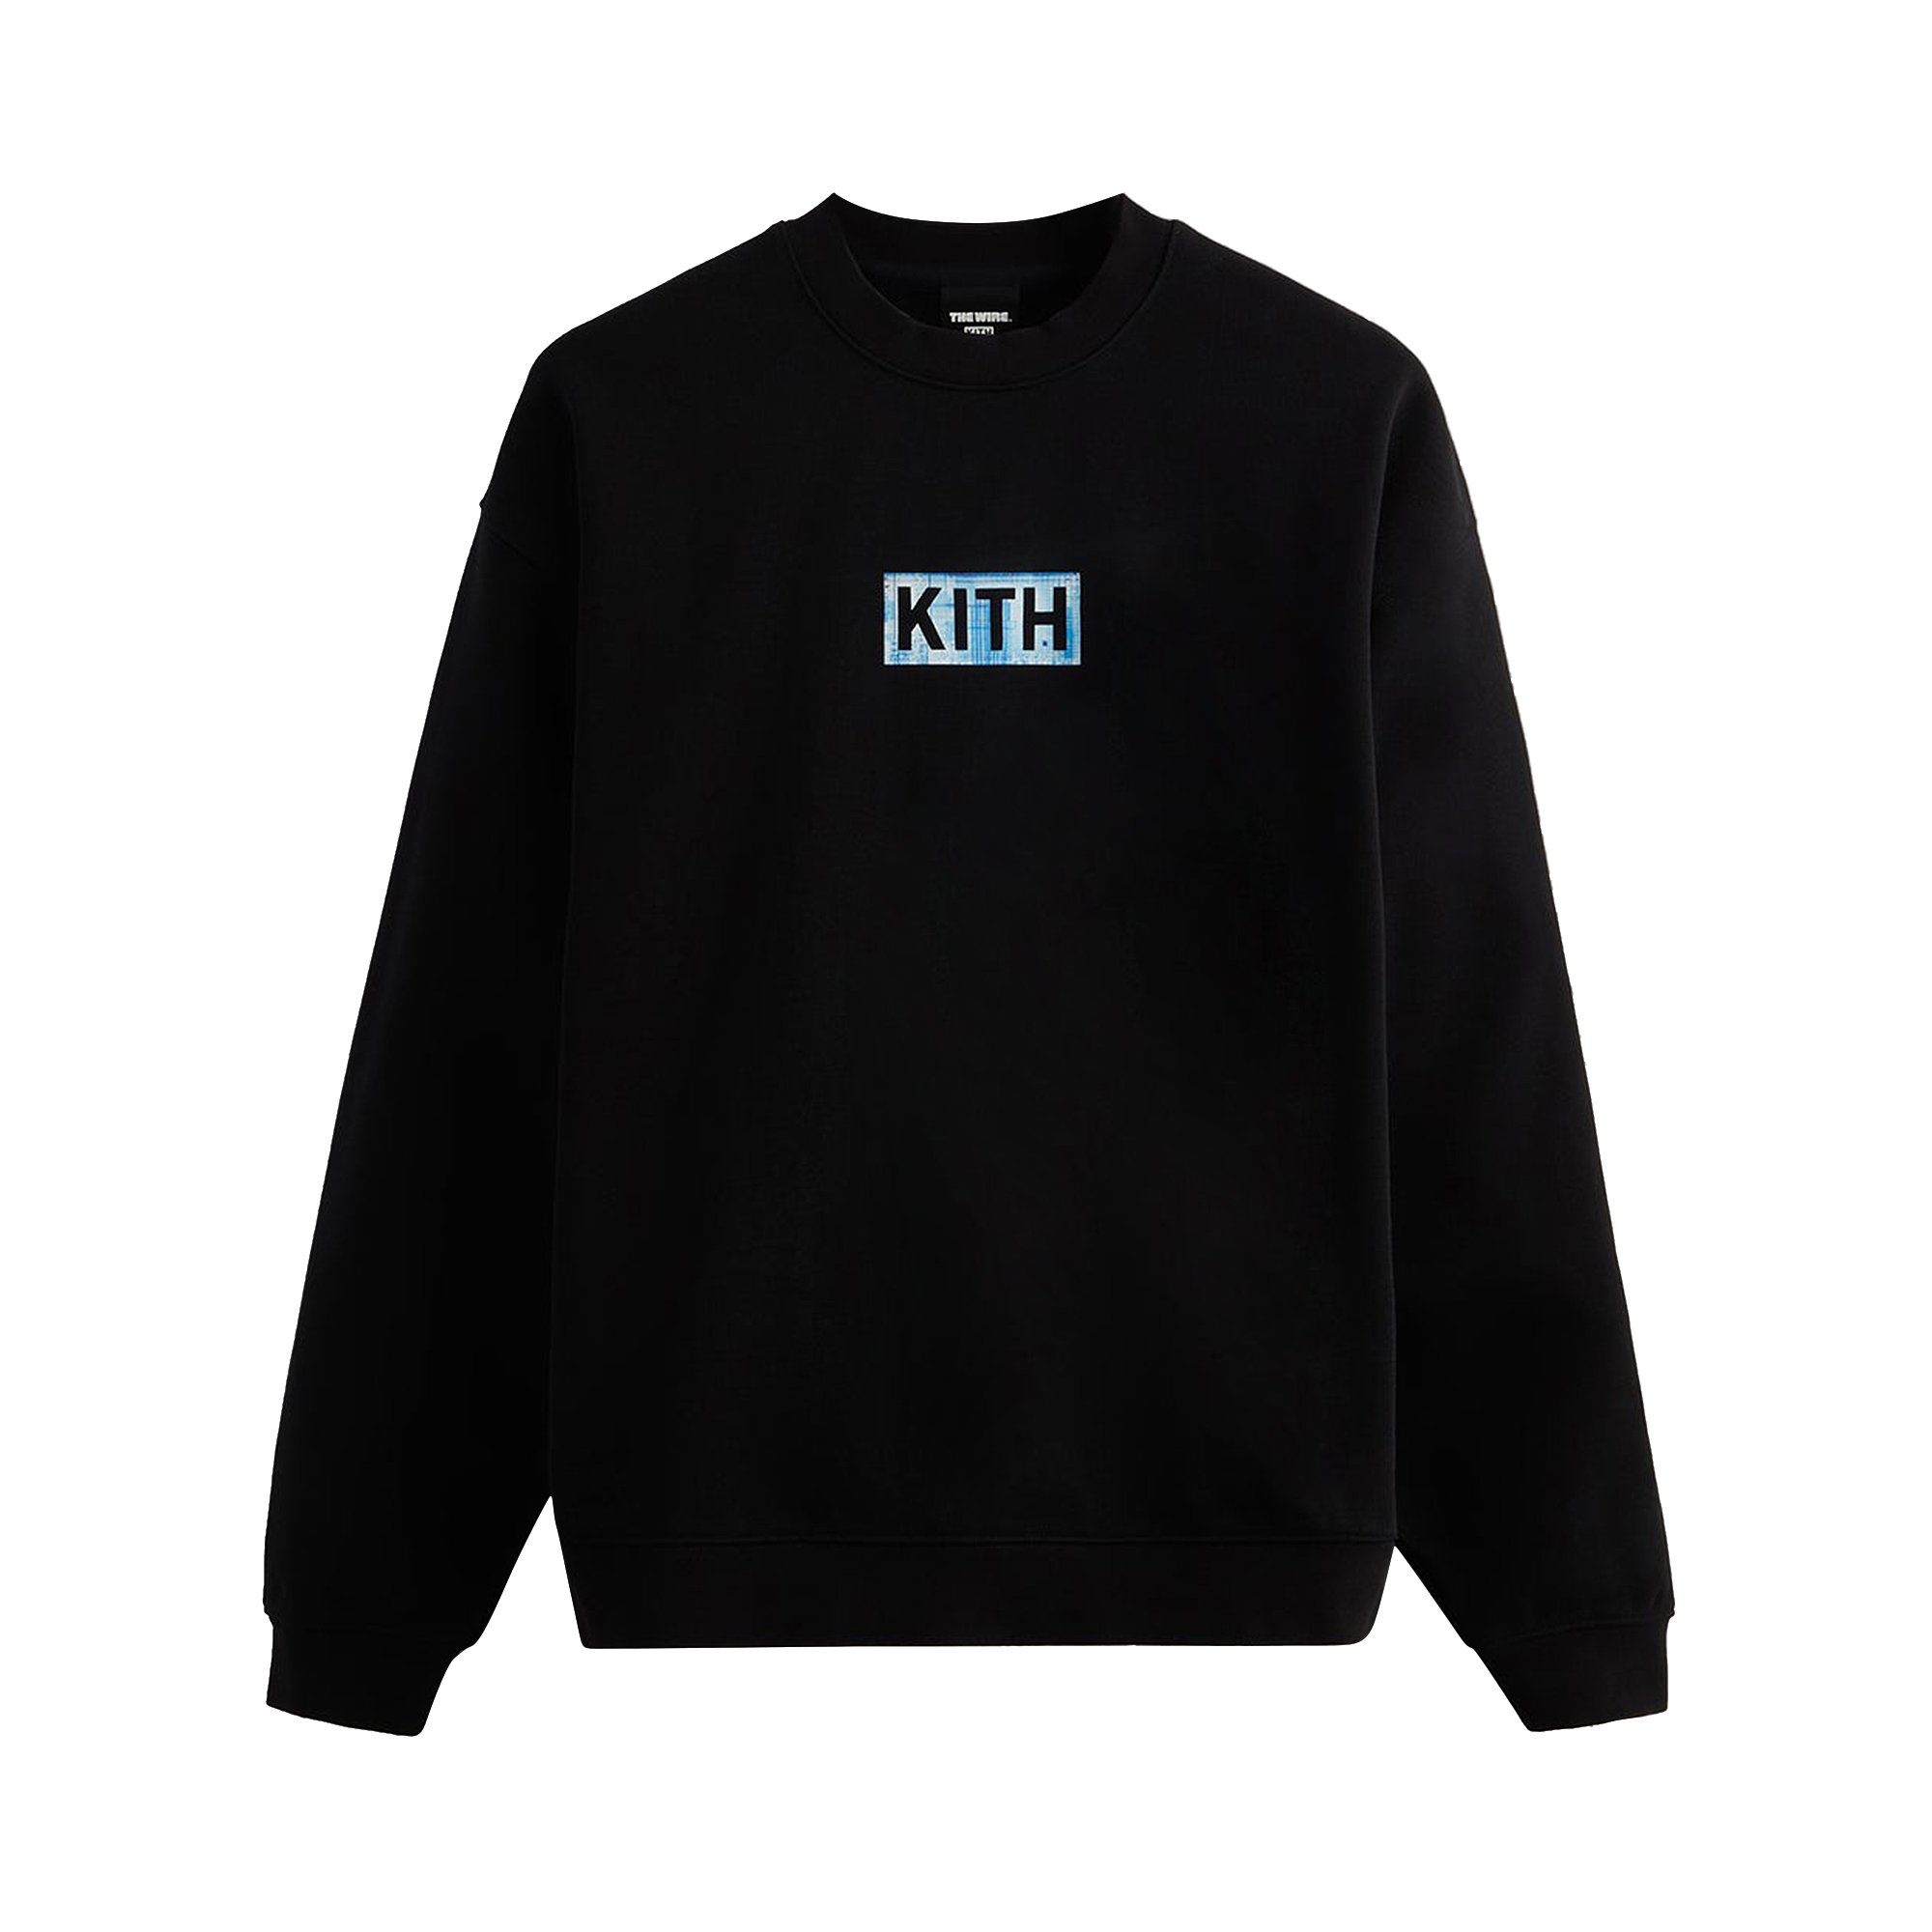 Buy Kith For The Wire Rules Change Vintage Crewneck 'Black